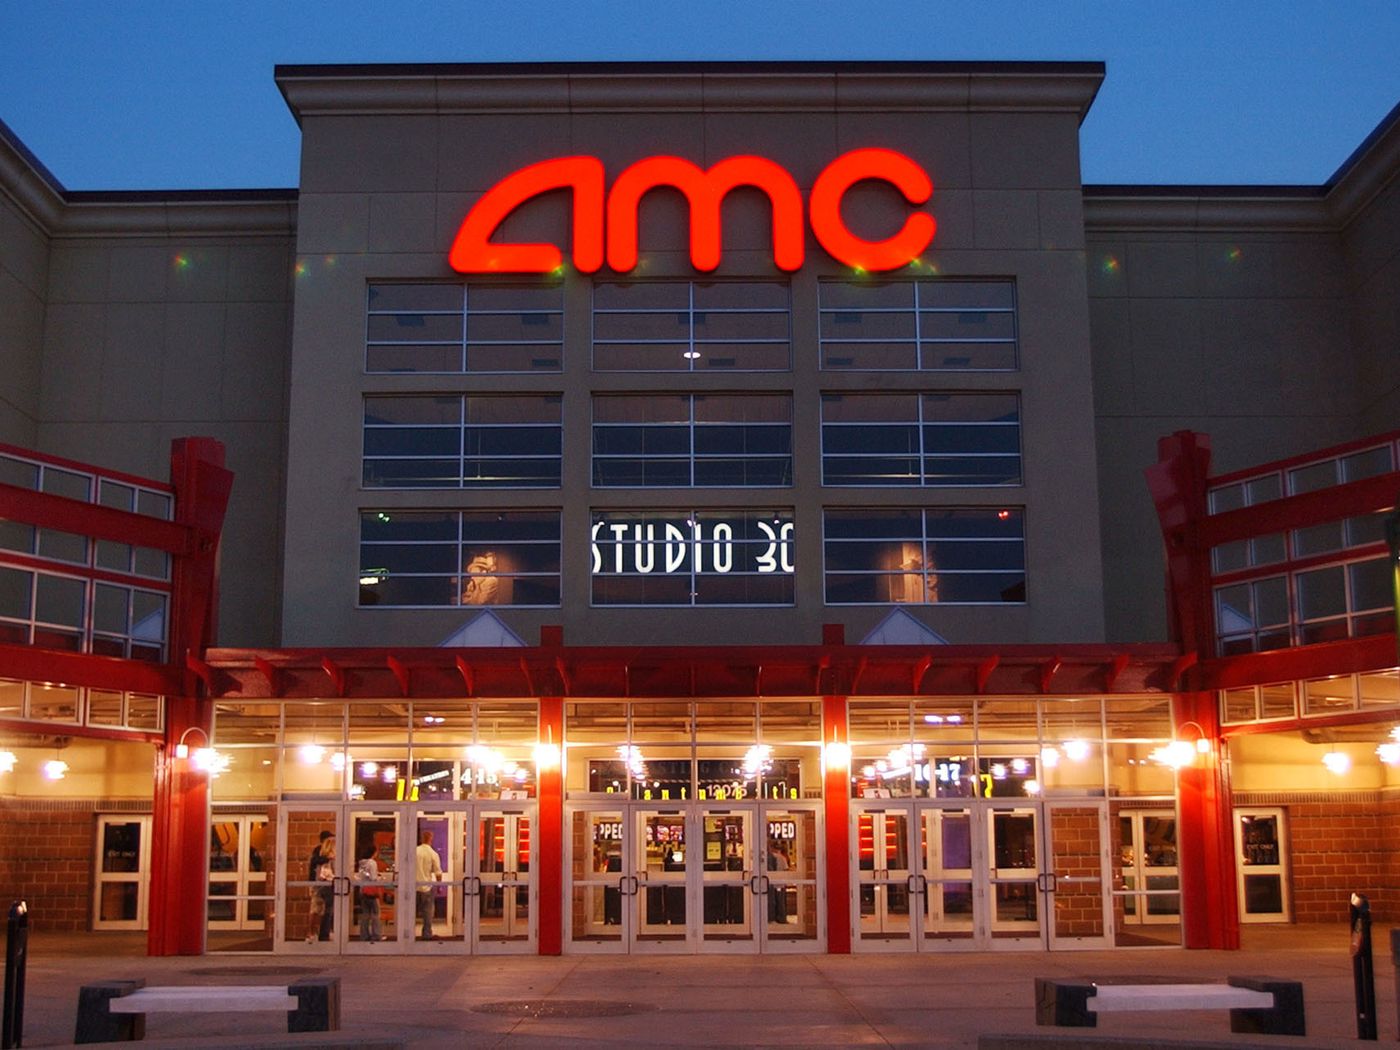 Amc Theatres Has New Private Screening Rentals Heres How To Get One - Deseret News